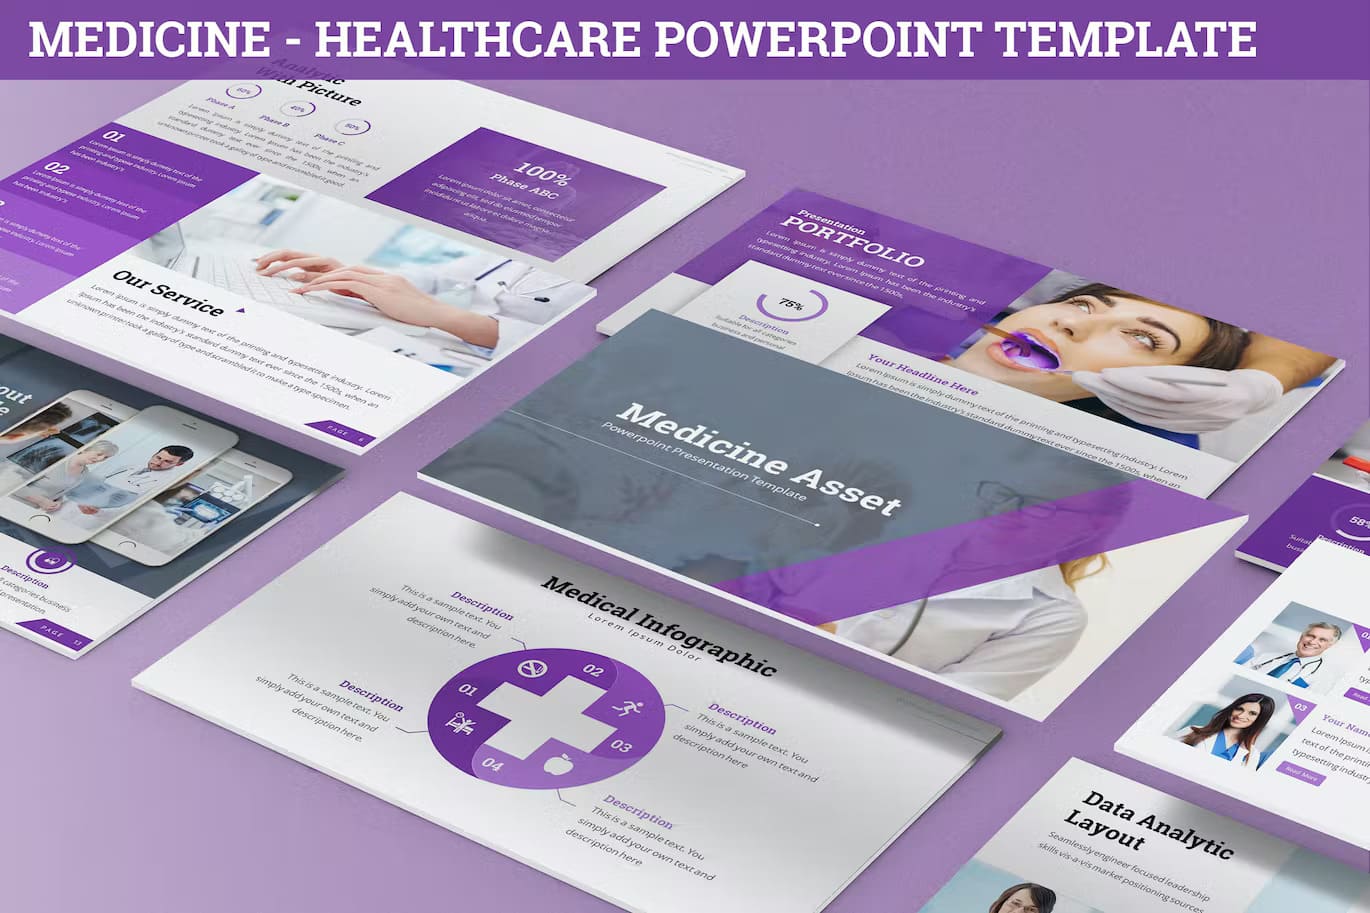 Service of the Medicine - Healthcare Powerpoint Template.